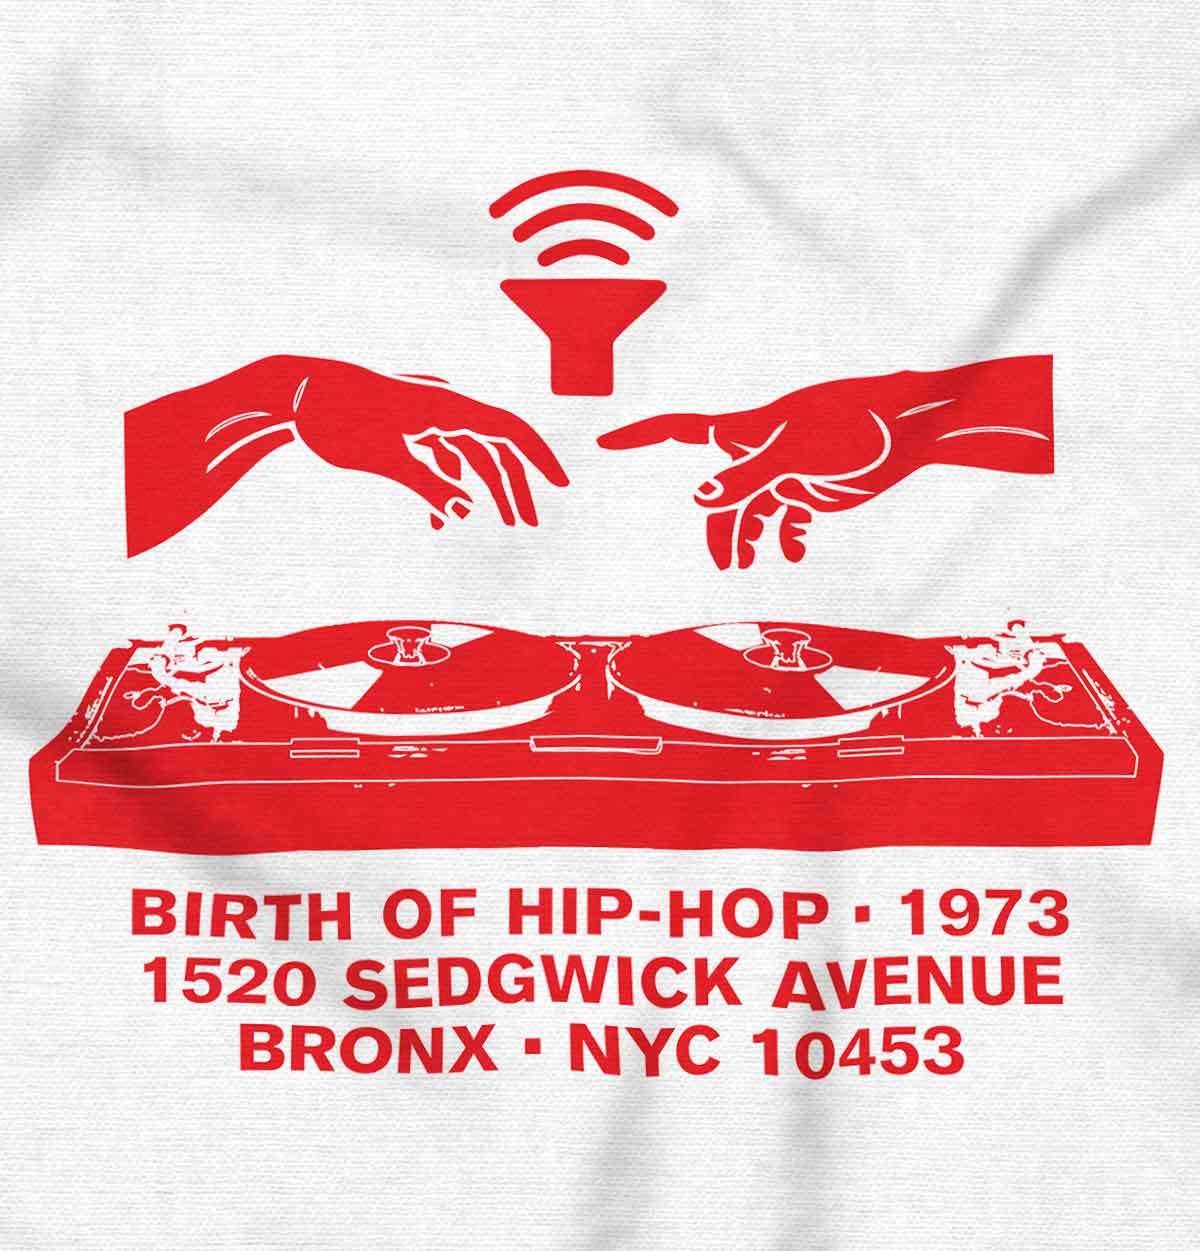 This design represents the birthplace of hip-hop in the Bronx, NYC in 1973, capturing its energy and culture, and serves as a symbol of our dedication and love for the genre.